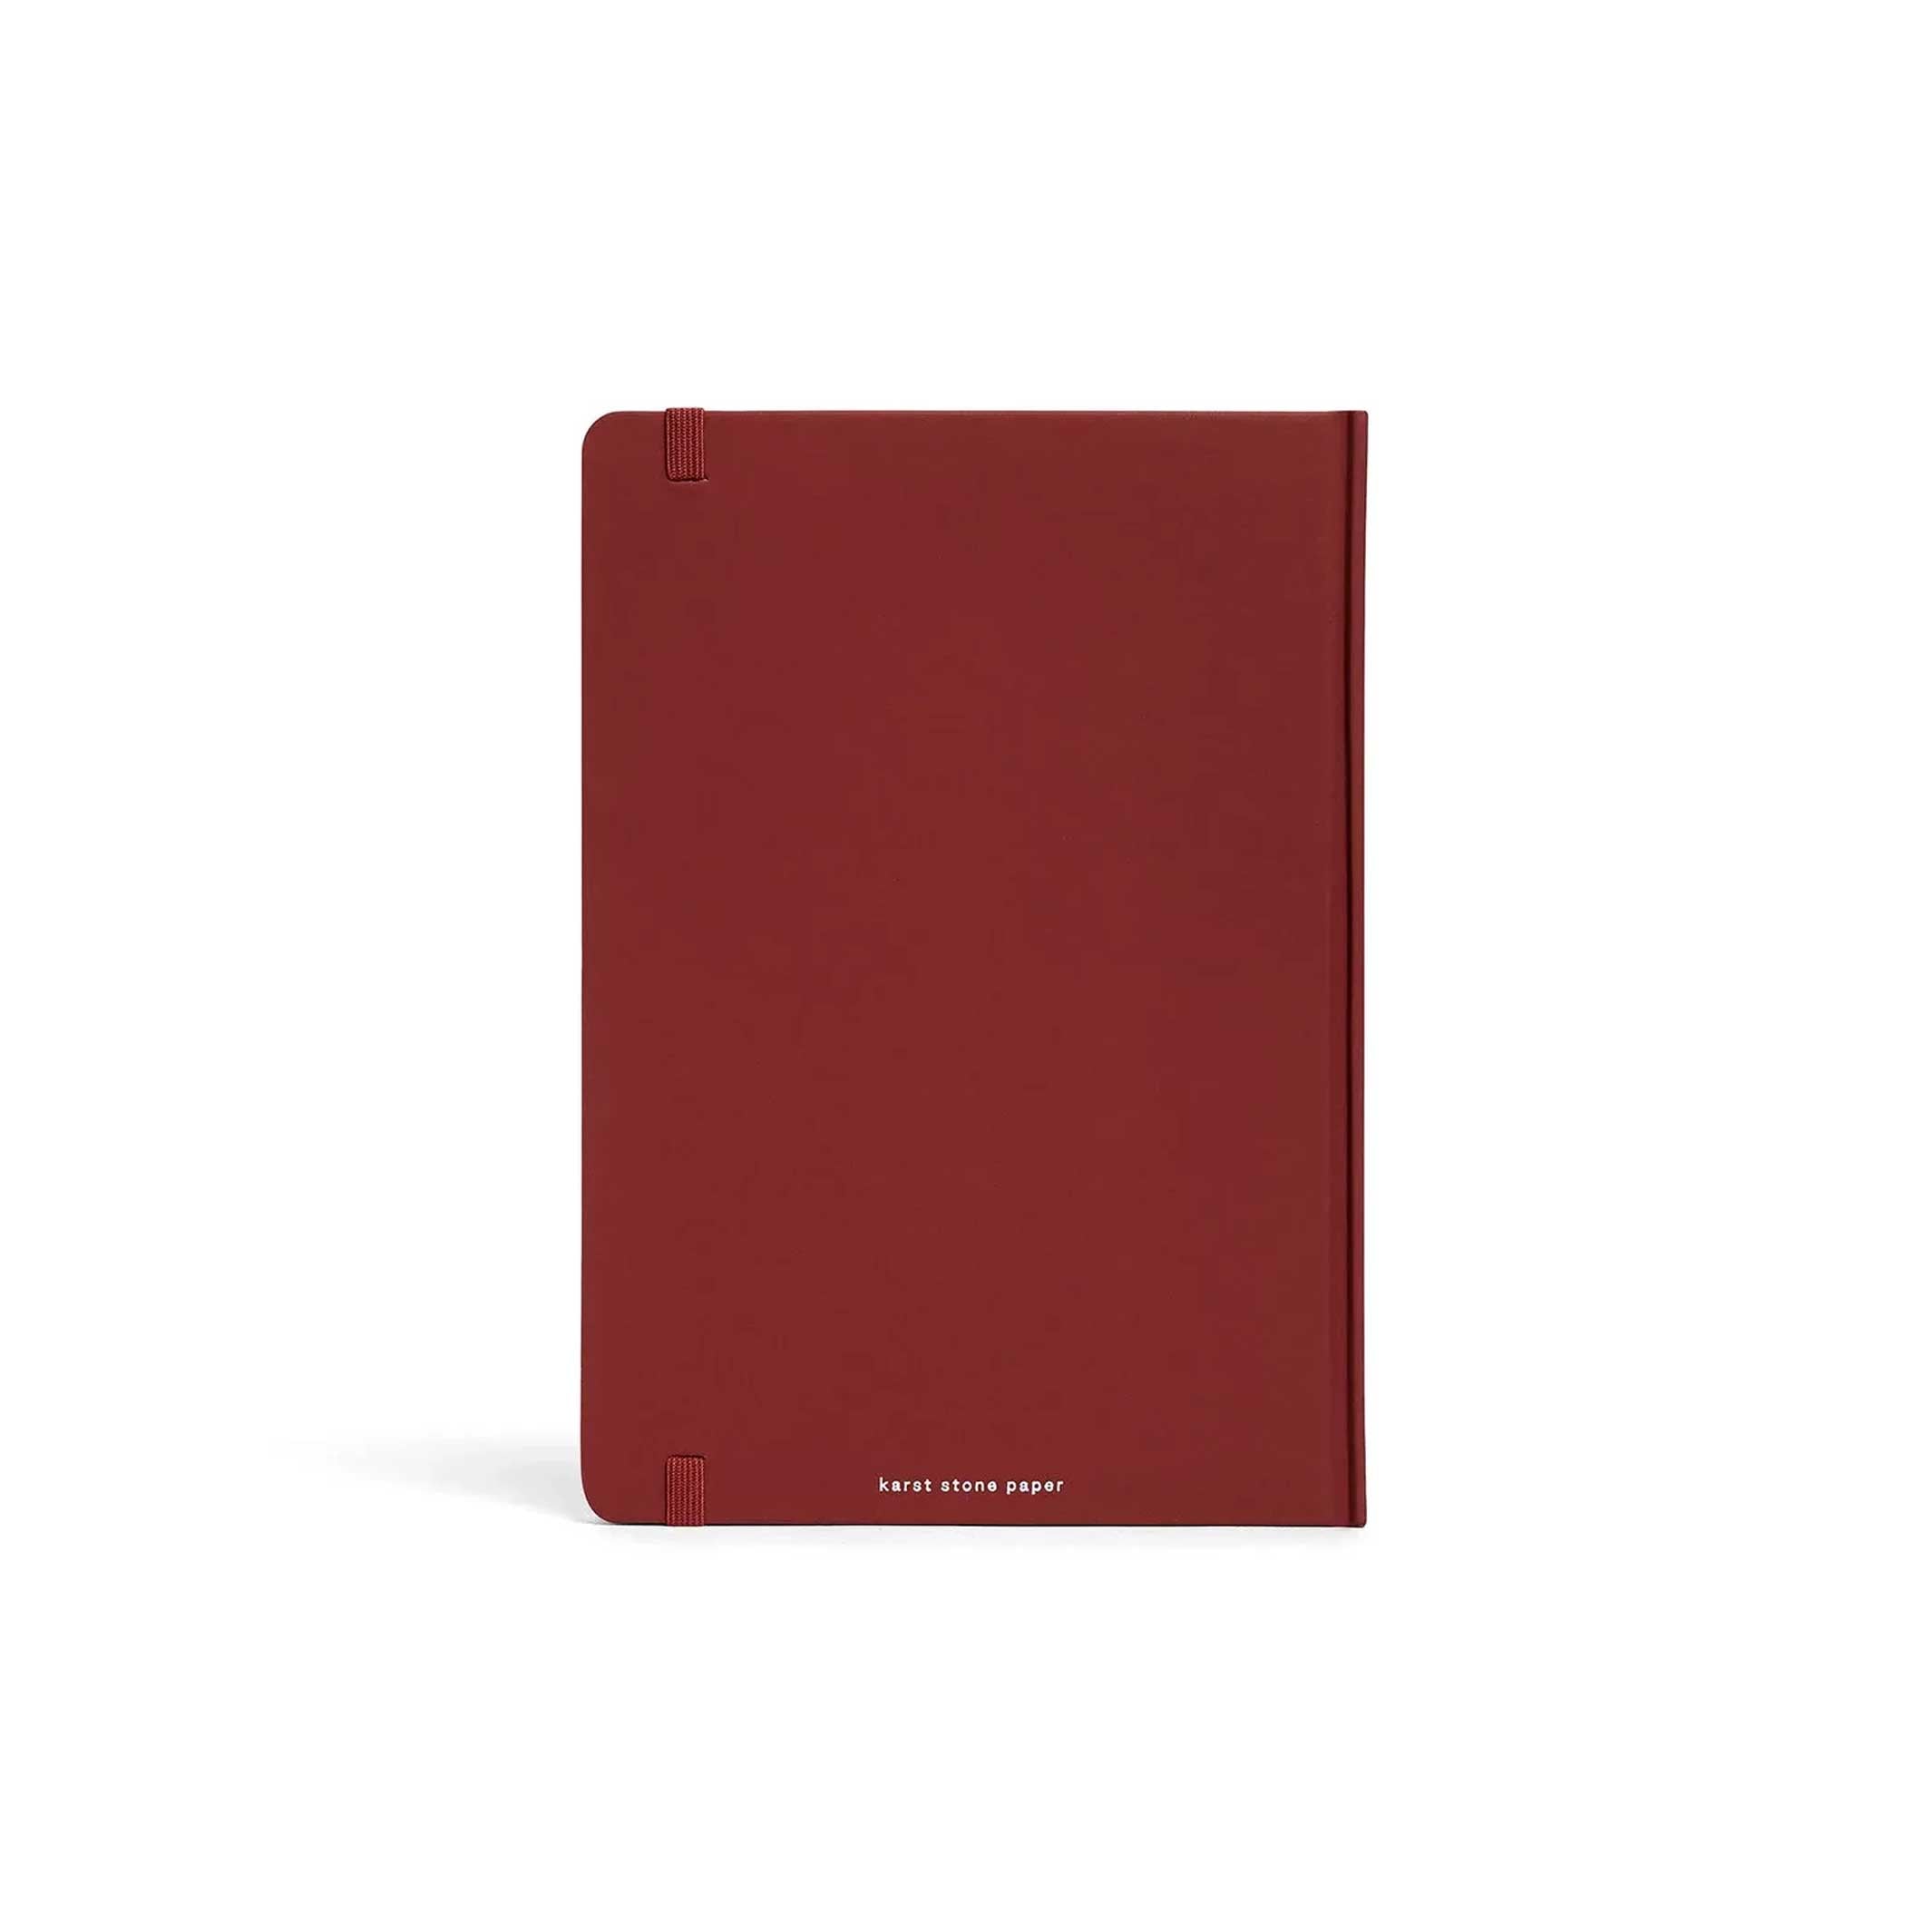 Hardcover NOTEBOOK A5 | Pinot-rotes NOTIZBUCH | Karst Stone Paper